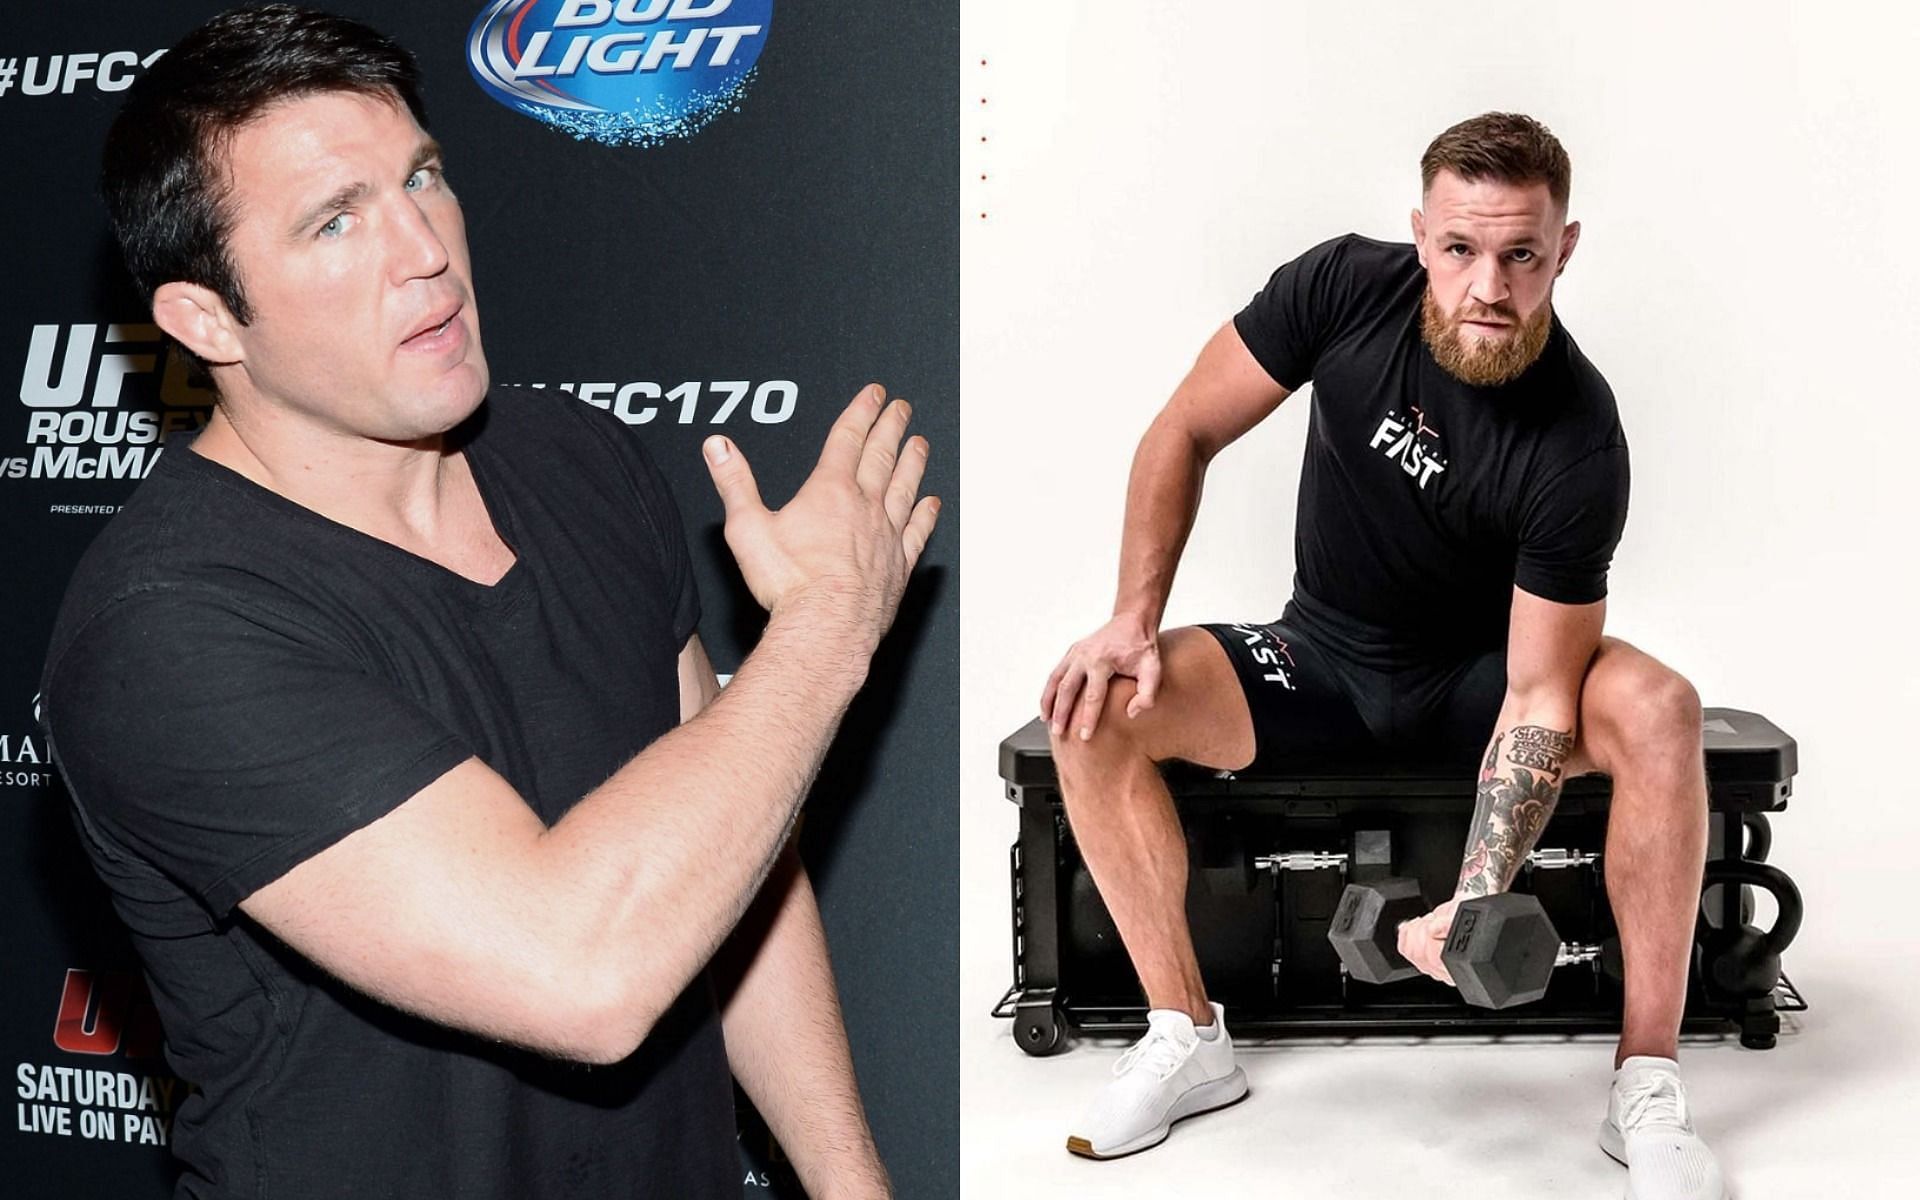 Chael Sonnen hilariously goes off on Conor McGregor whilst challenging him to an arm-wrestling match